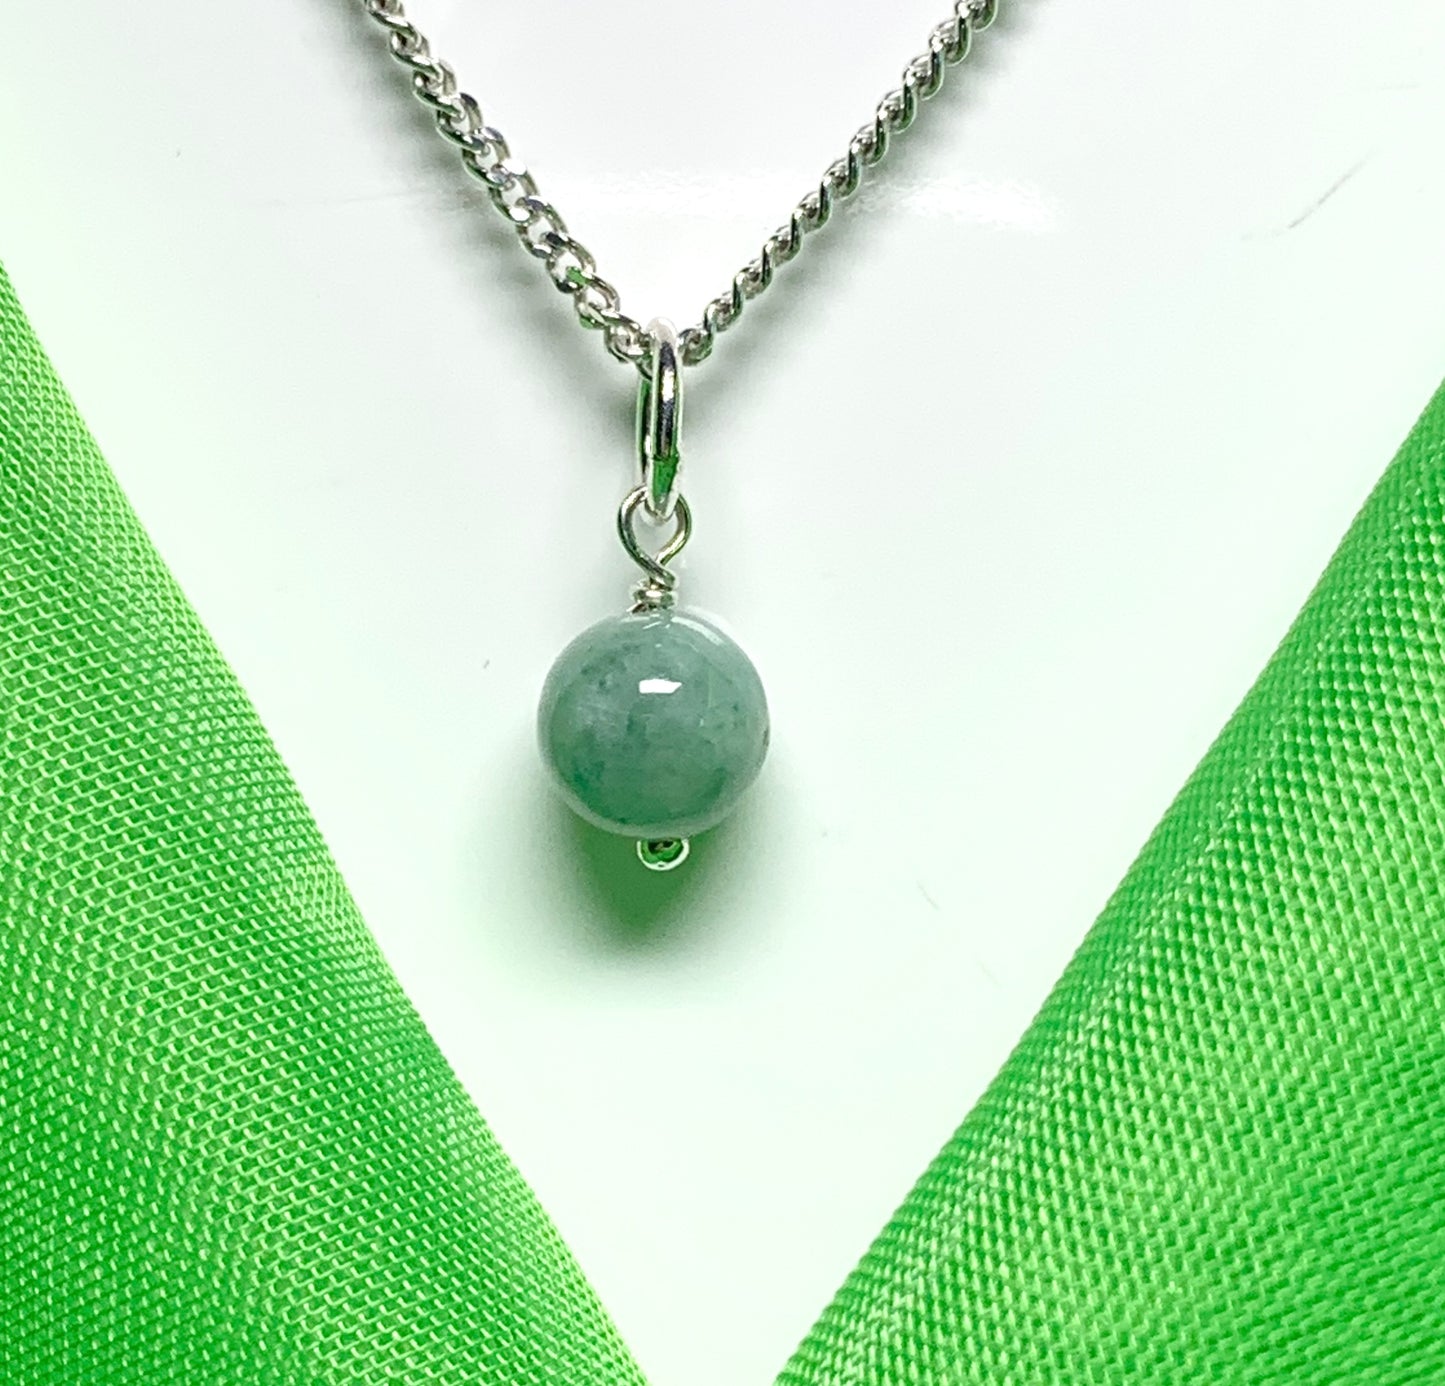 Small round real green jade necklace ball shaped pendant